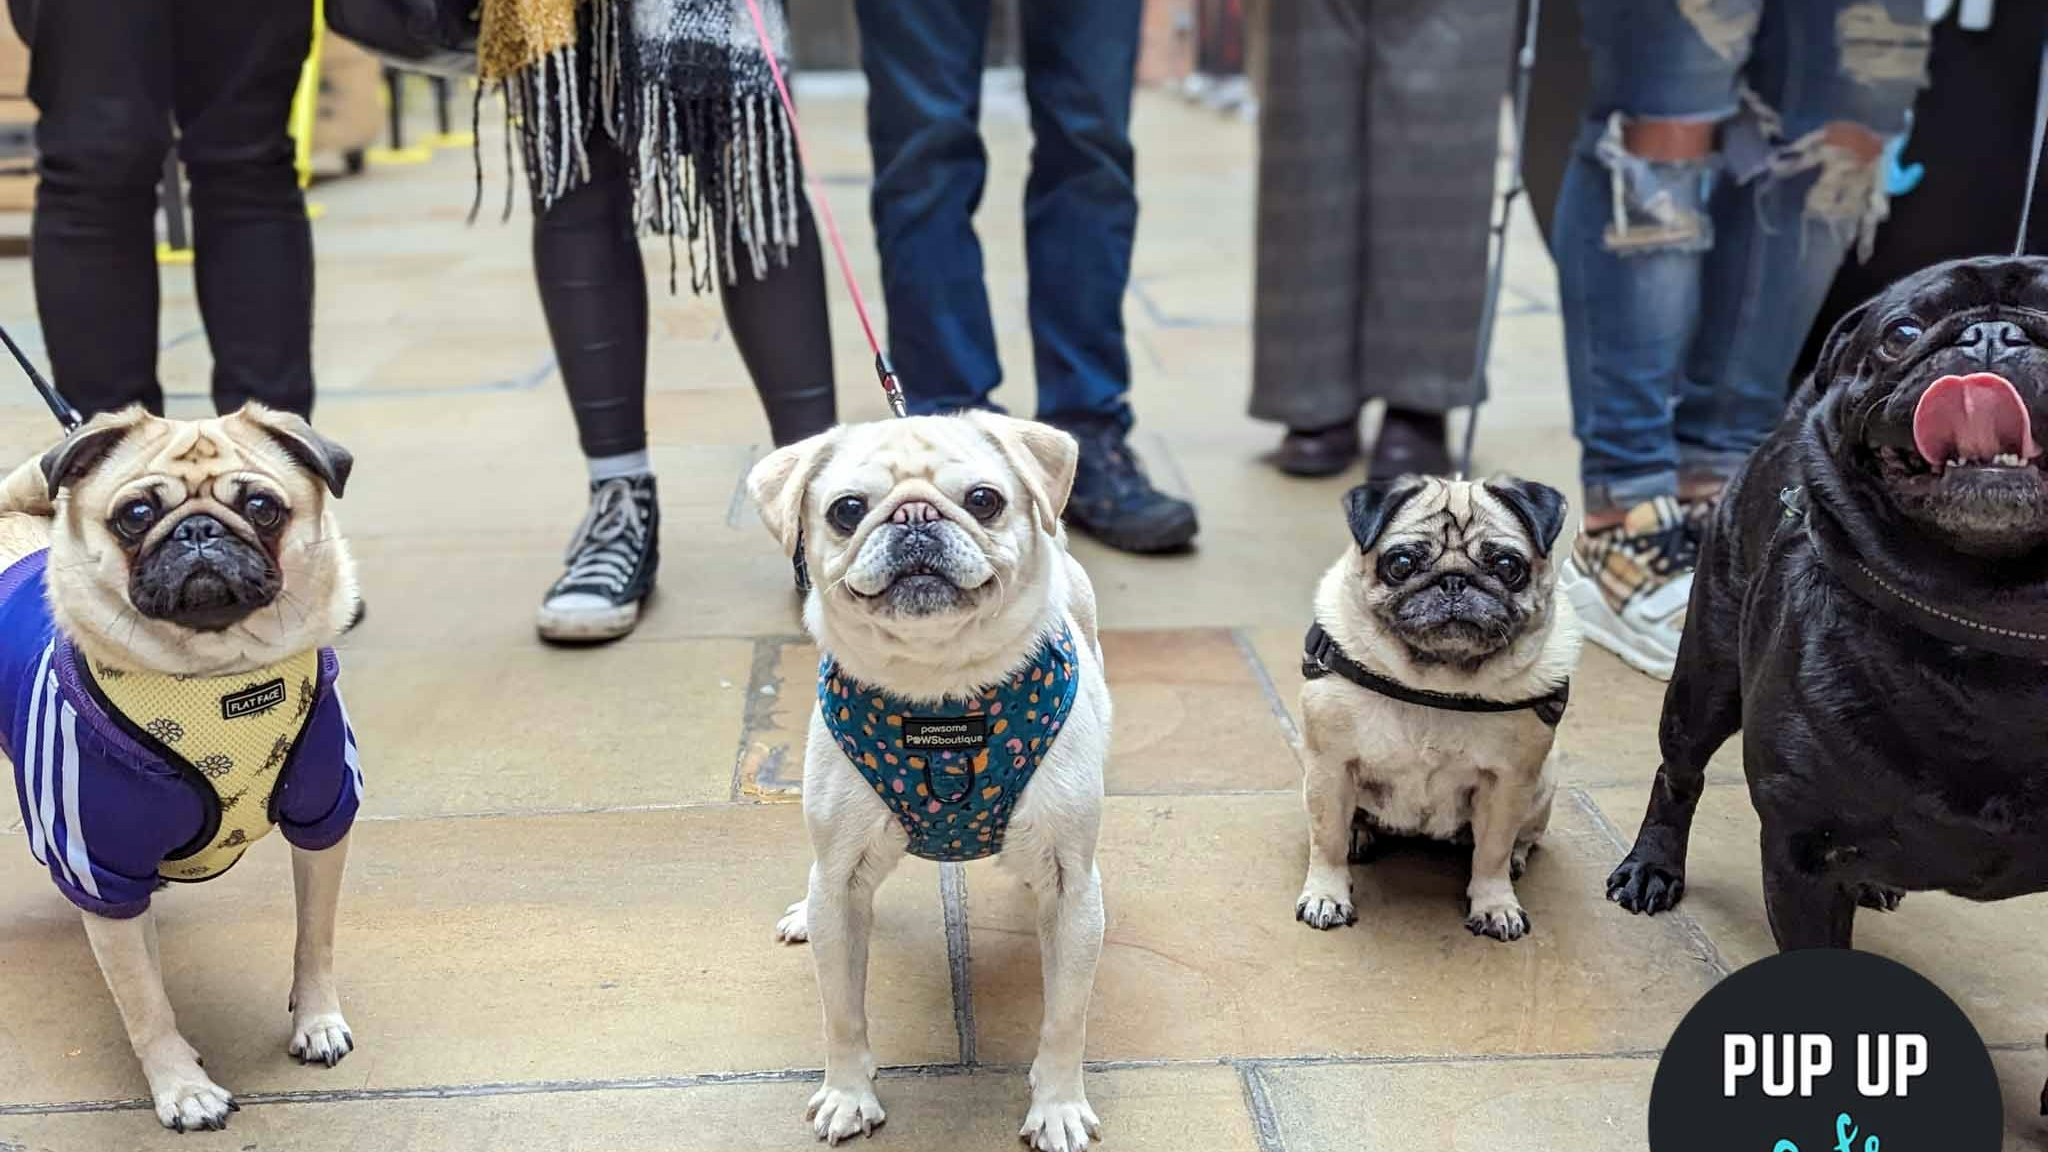 ALL BREEDS Pup Up Cafe – Southampton | SUMMER TOUR! 🌞 (Dachshund/Pug/Frenchie/Doodle/Other)